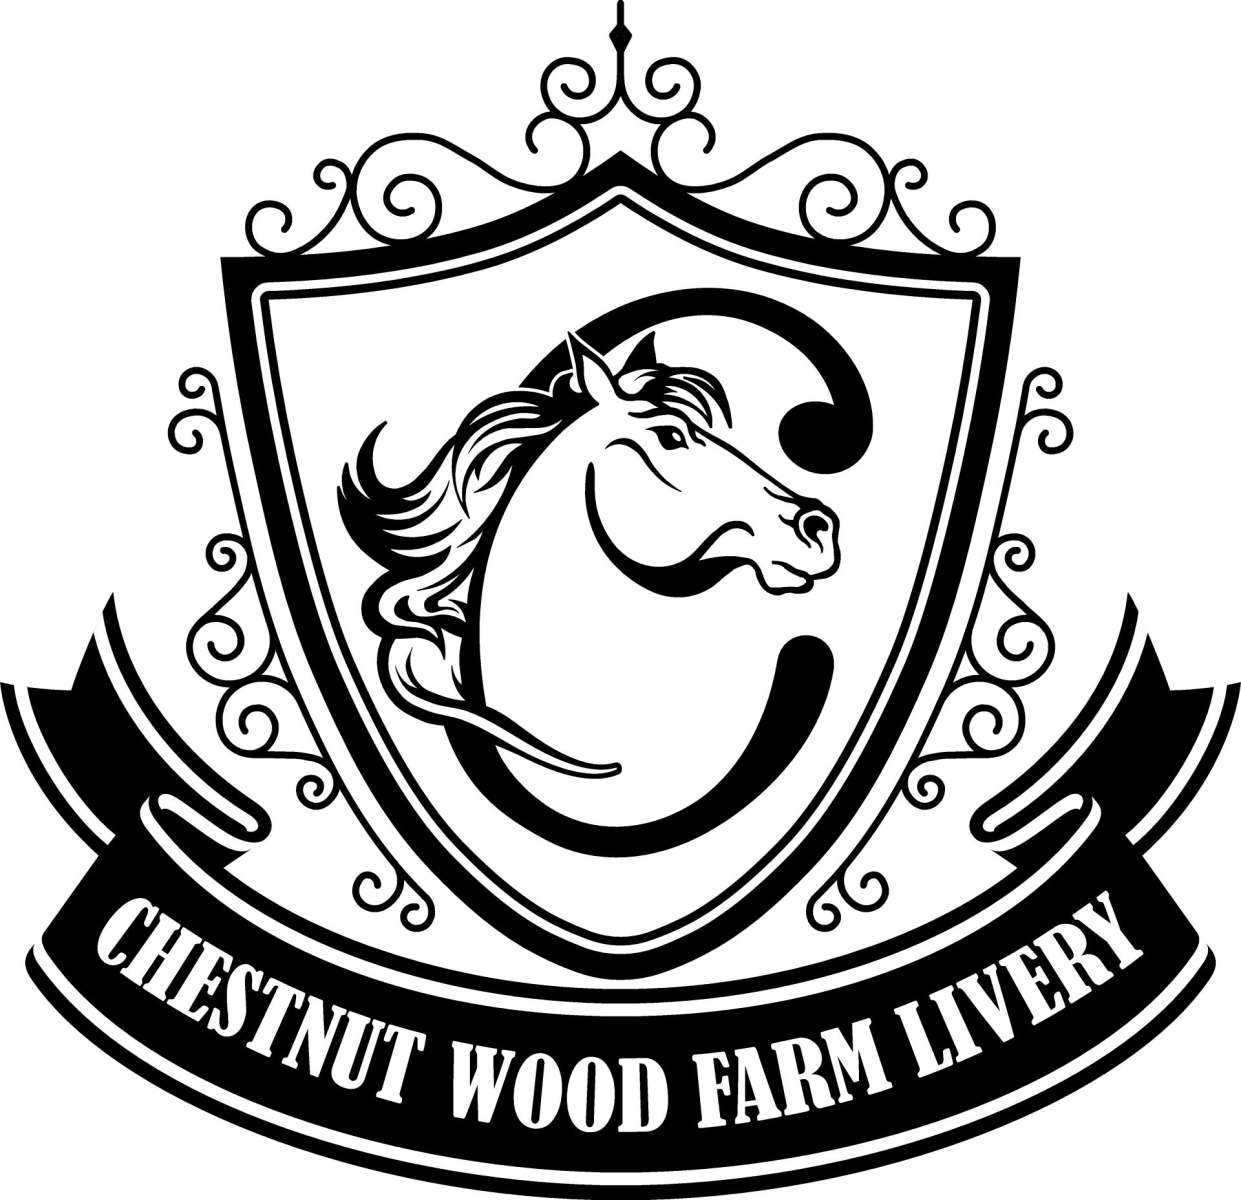 First-Class Livery | Chestnut Wood Farm Livery and Training